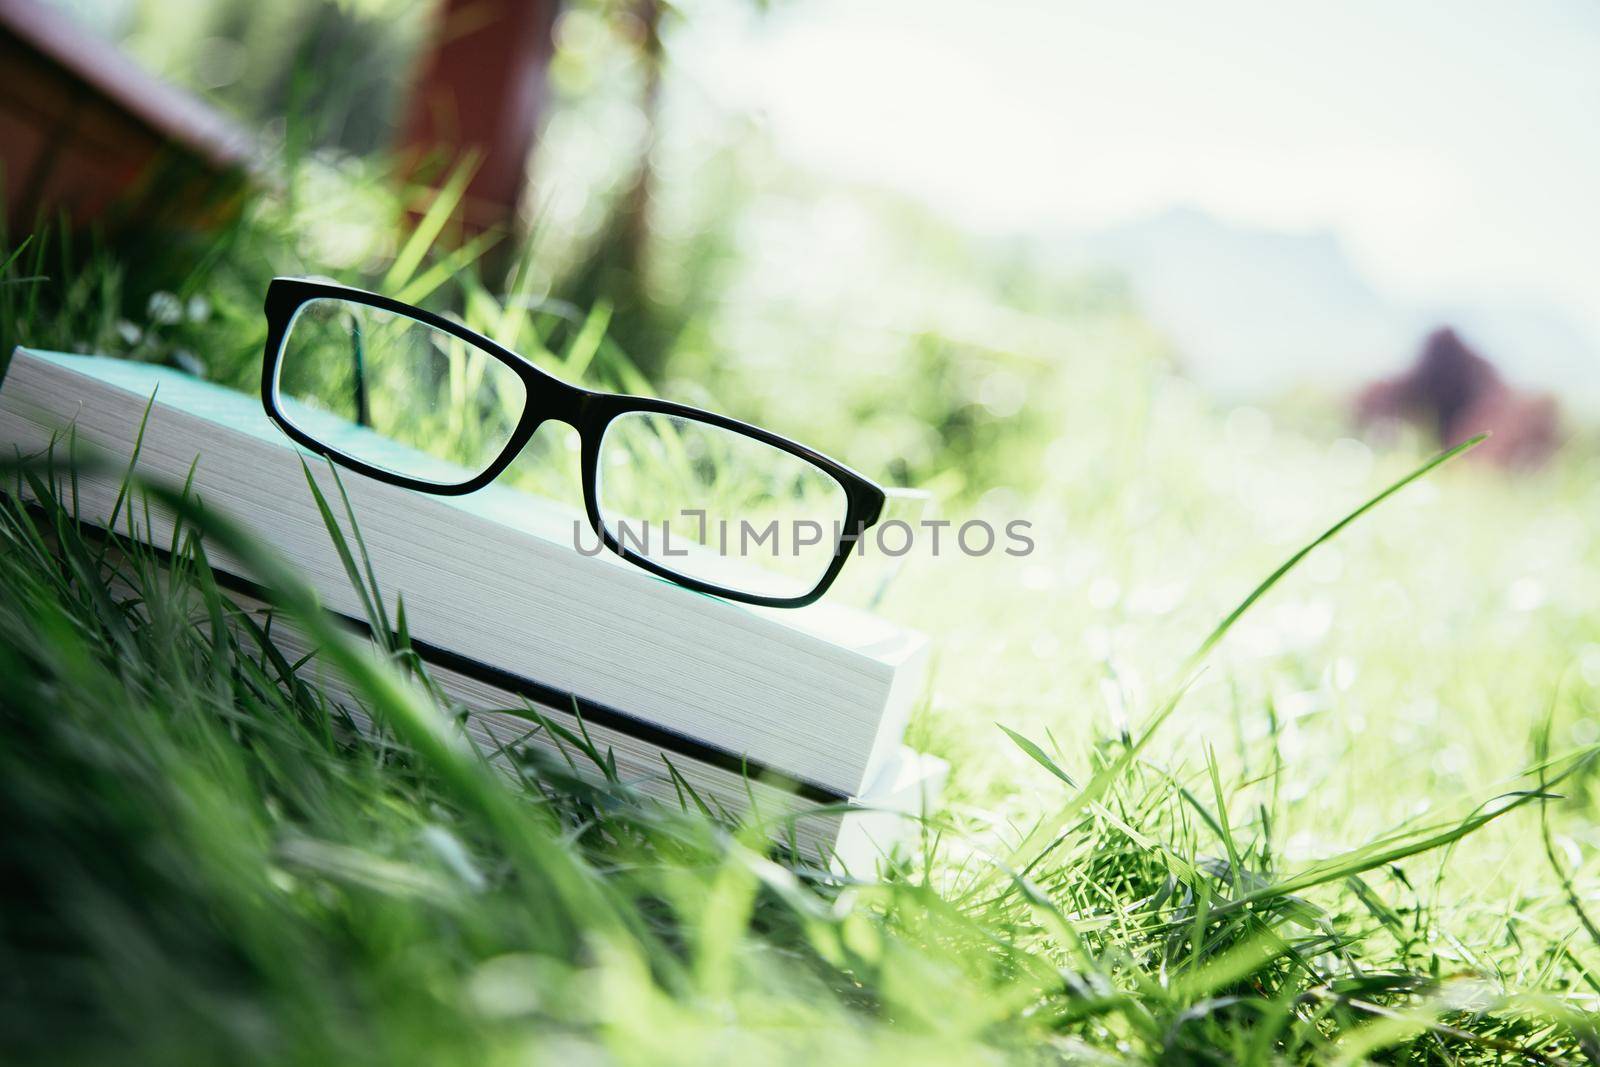 Studying outdoors: Glasses on book outdoors in the park, spring time by Daxenbichler